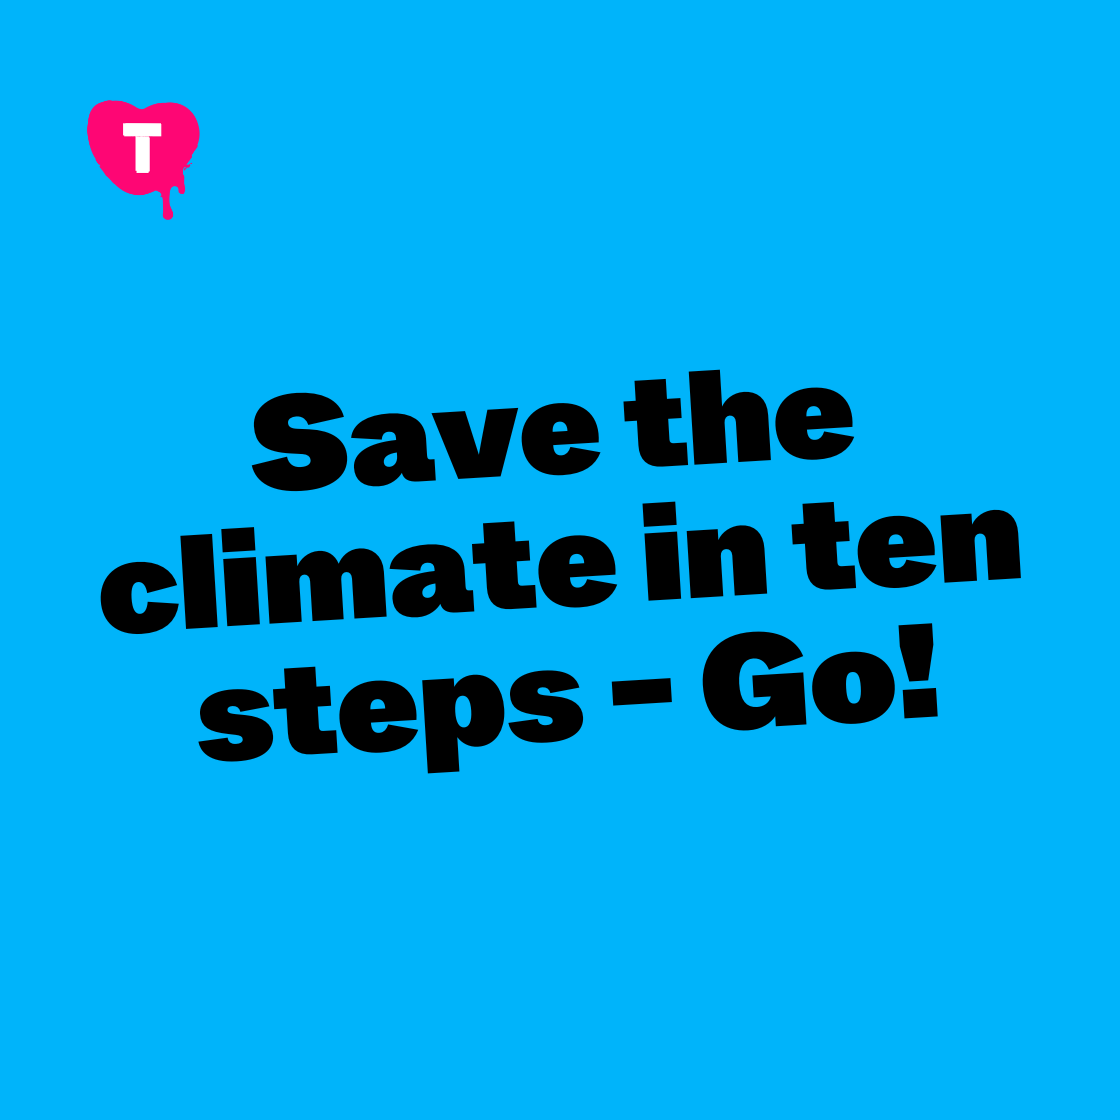 SAVE THE CLIMATE IN TEN STEPS - GO!?